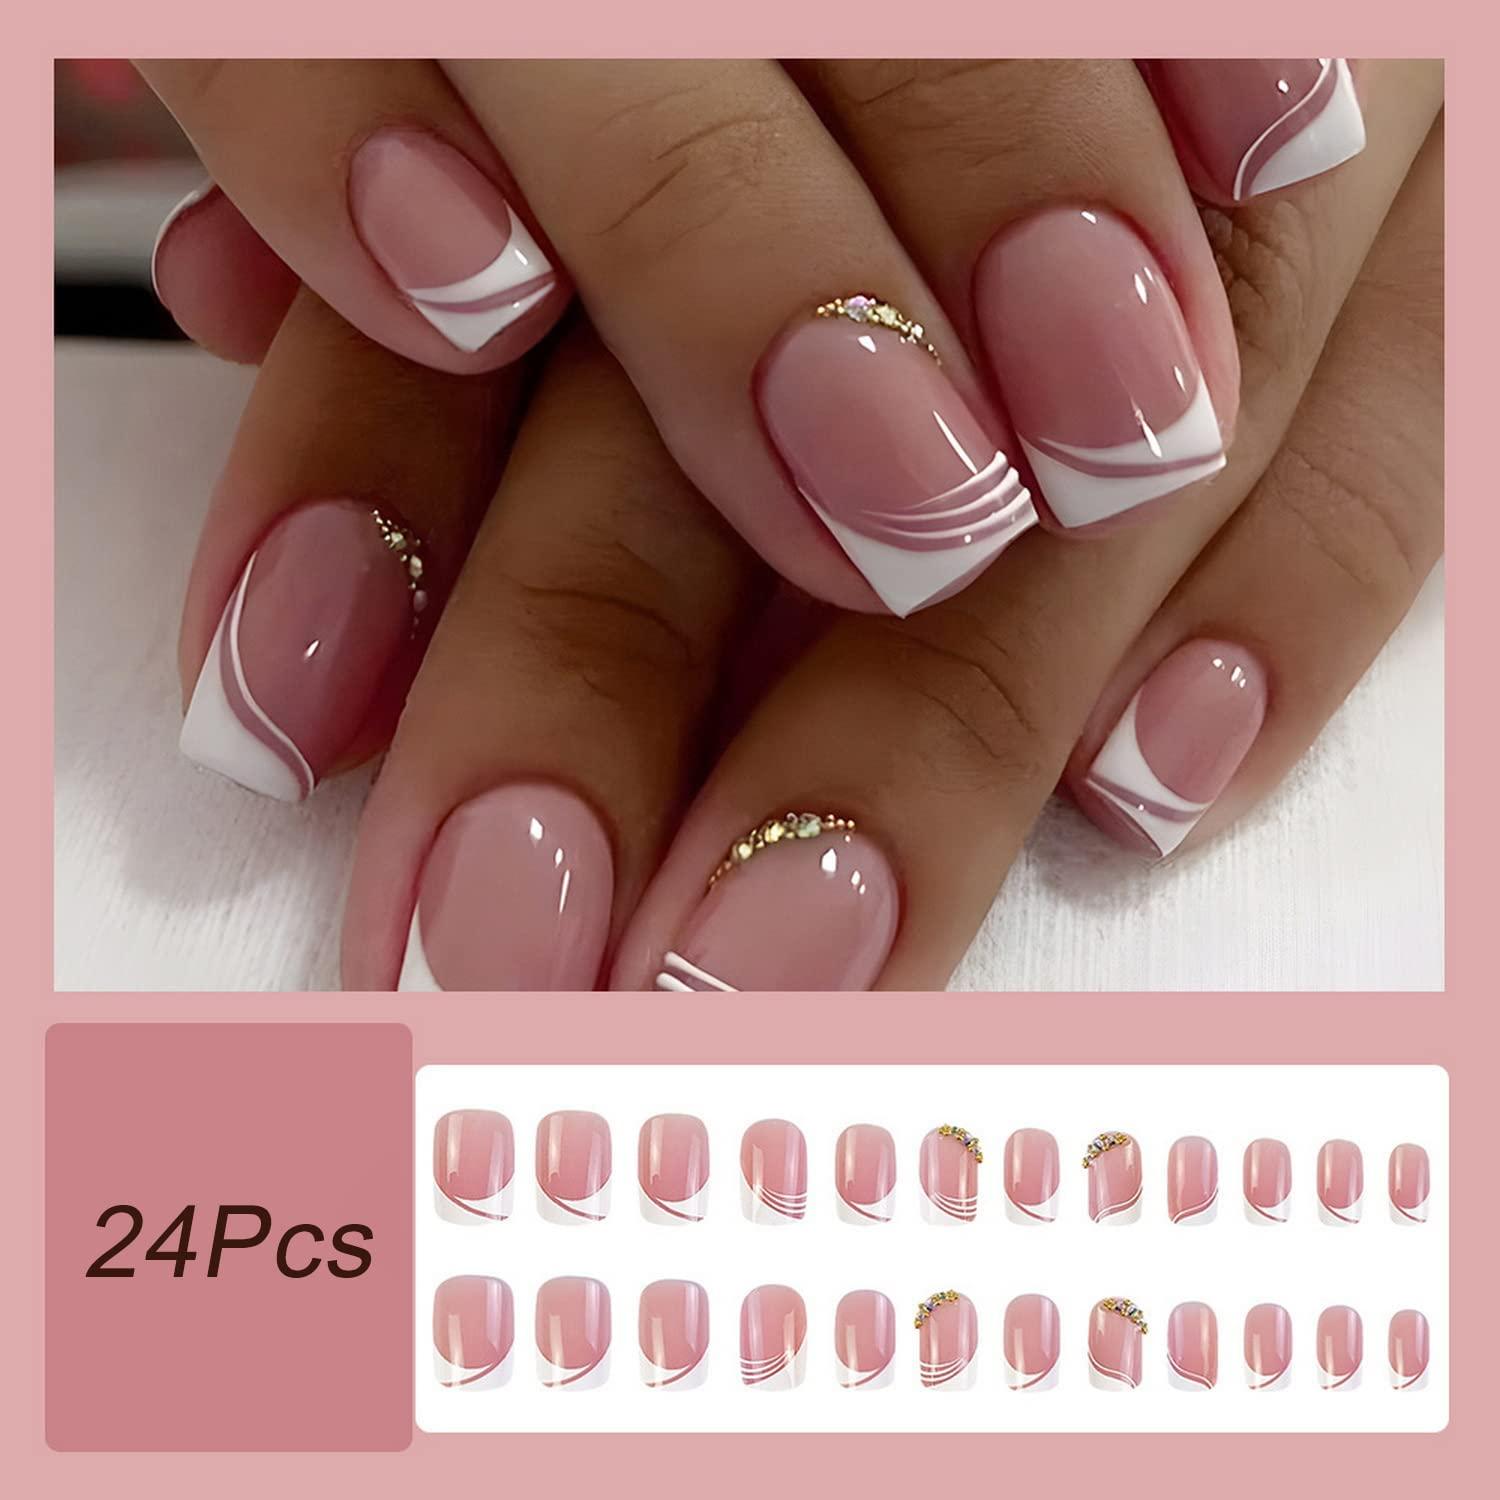 70 Ideas of French Manicure Nail Designs | Art and Design | French manicure  nail designs, Manicure nail designs, French nail designs